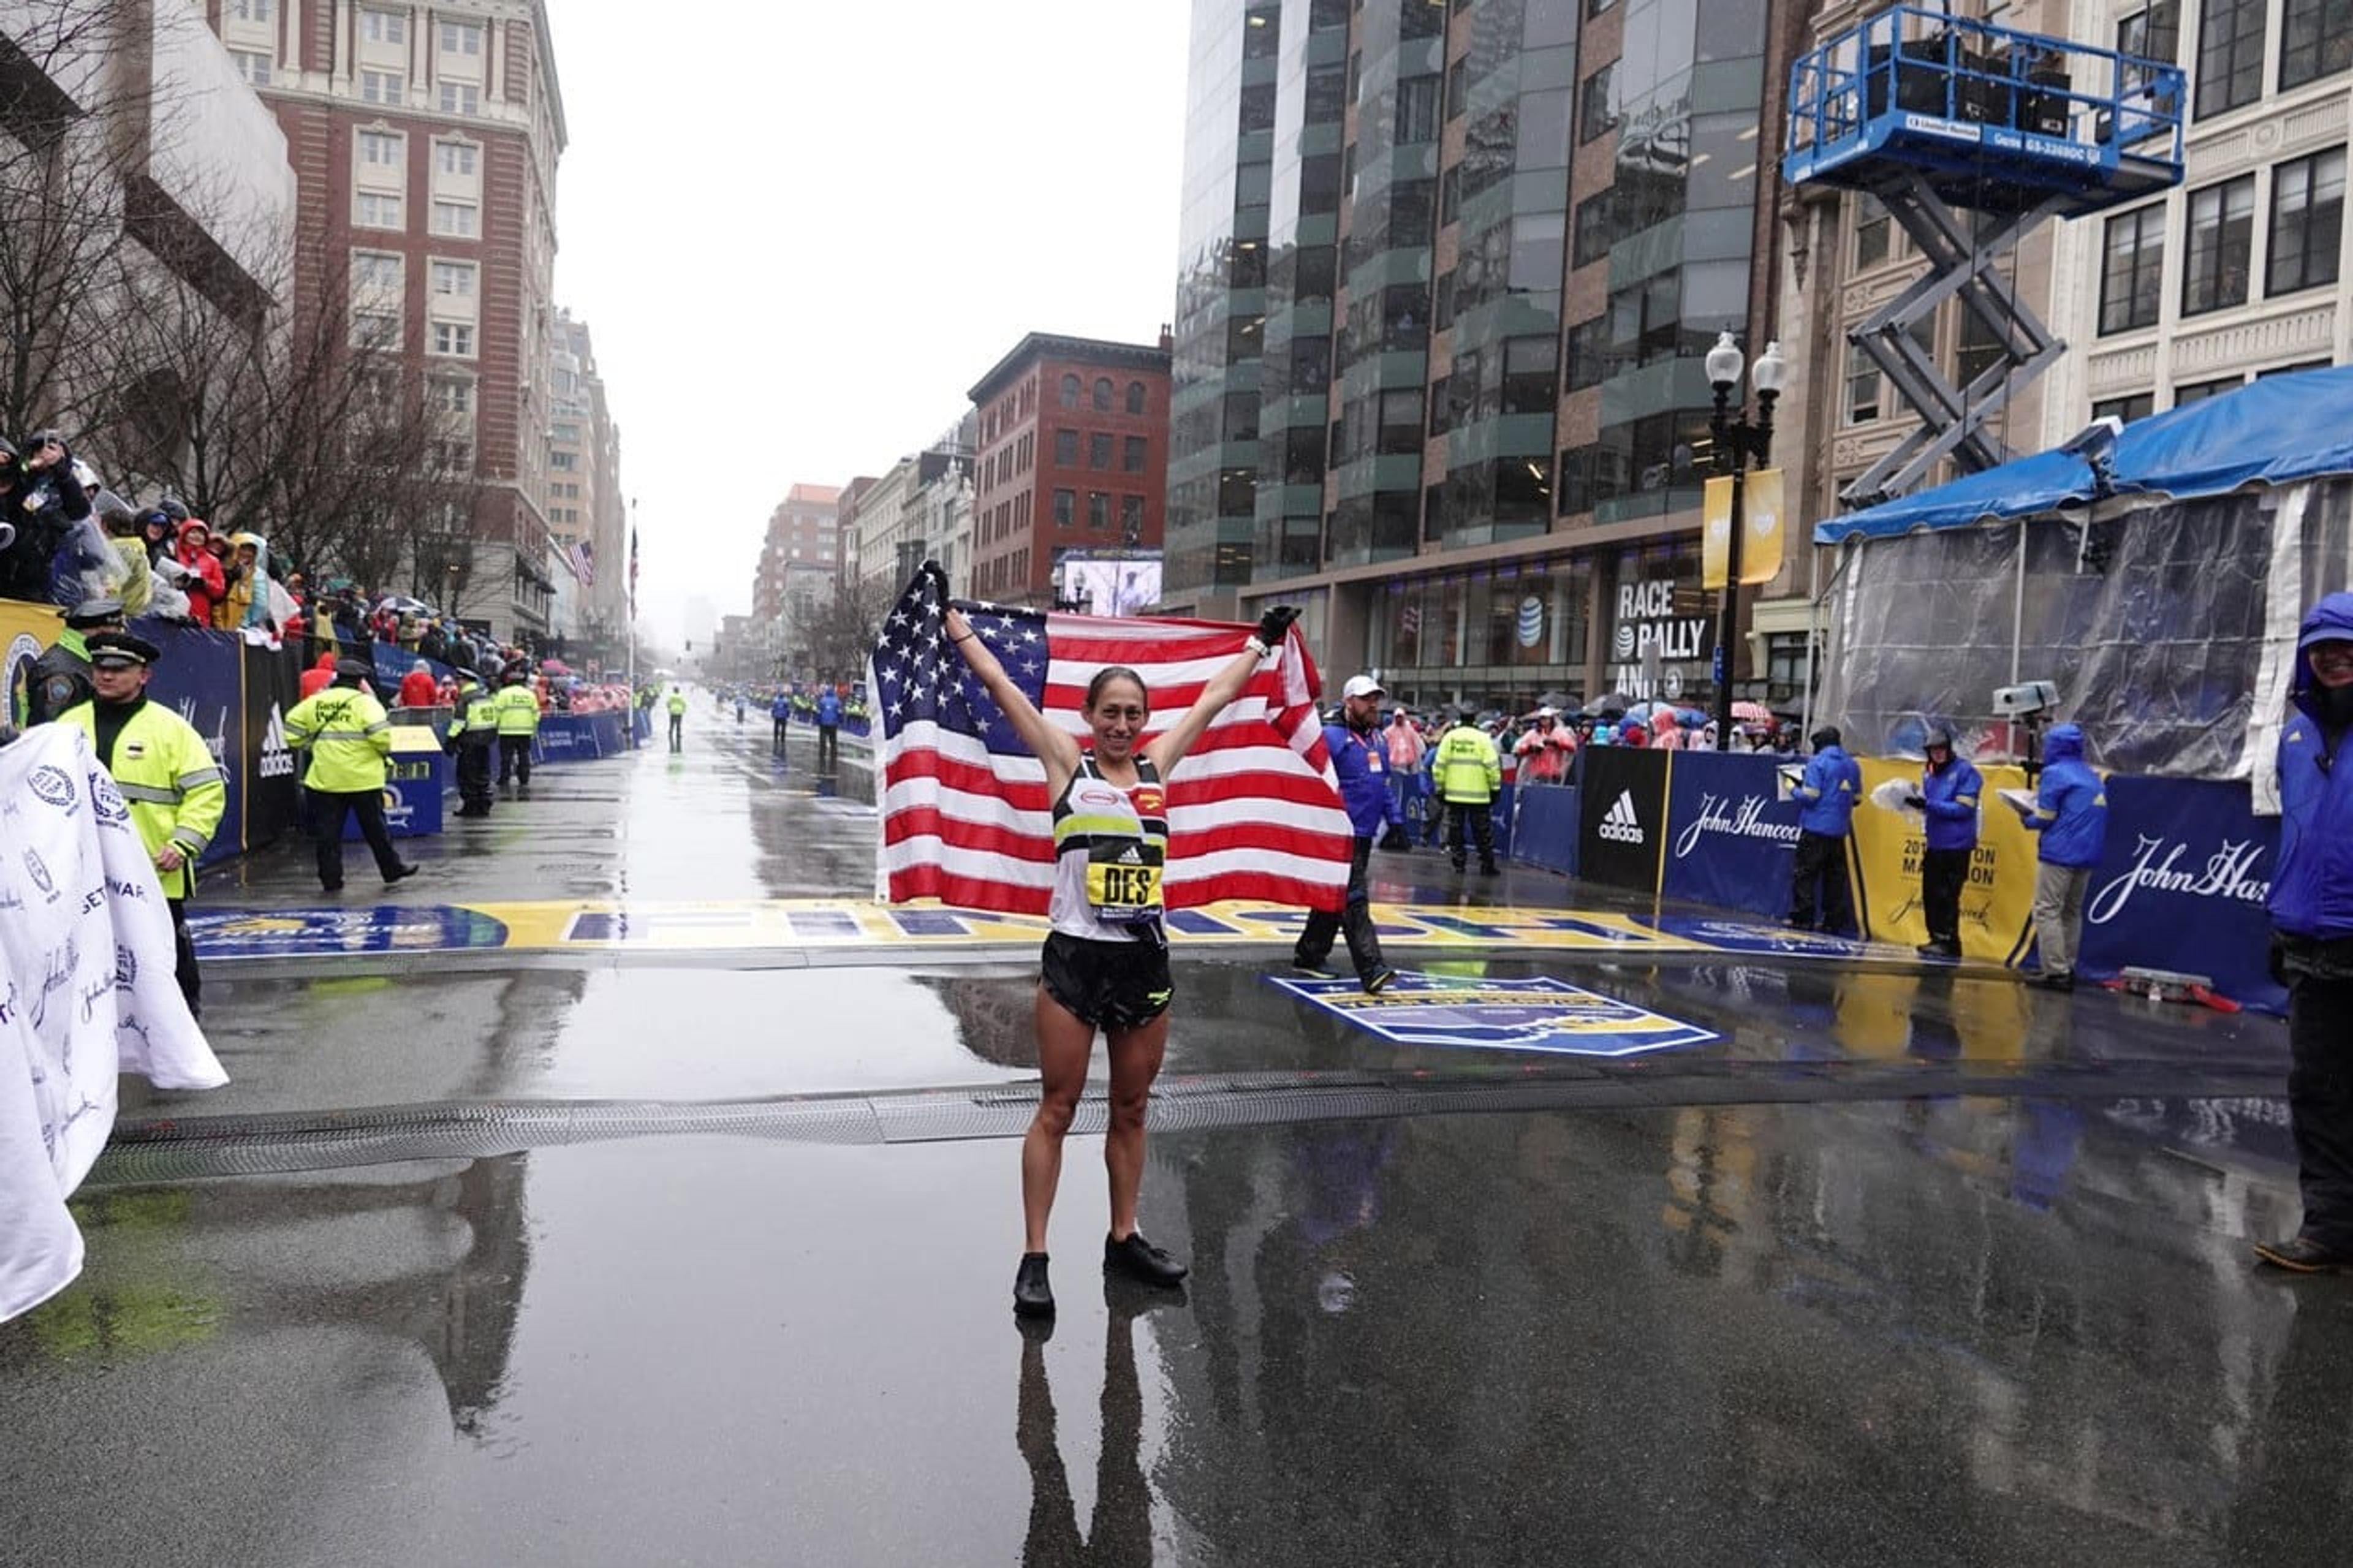 Photo of Desiree Linden holding up the American flag after winning the 2018 Boston Marathon.